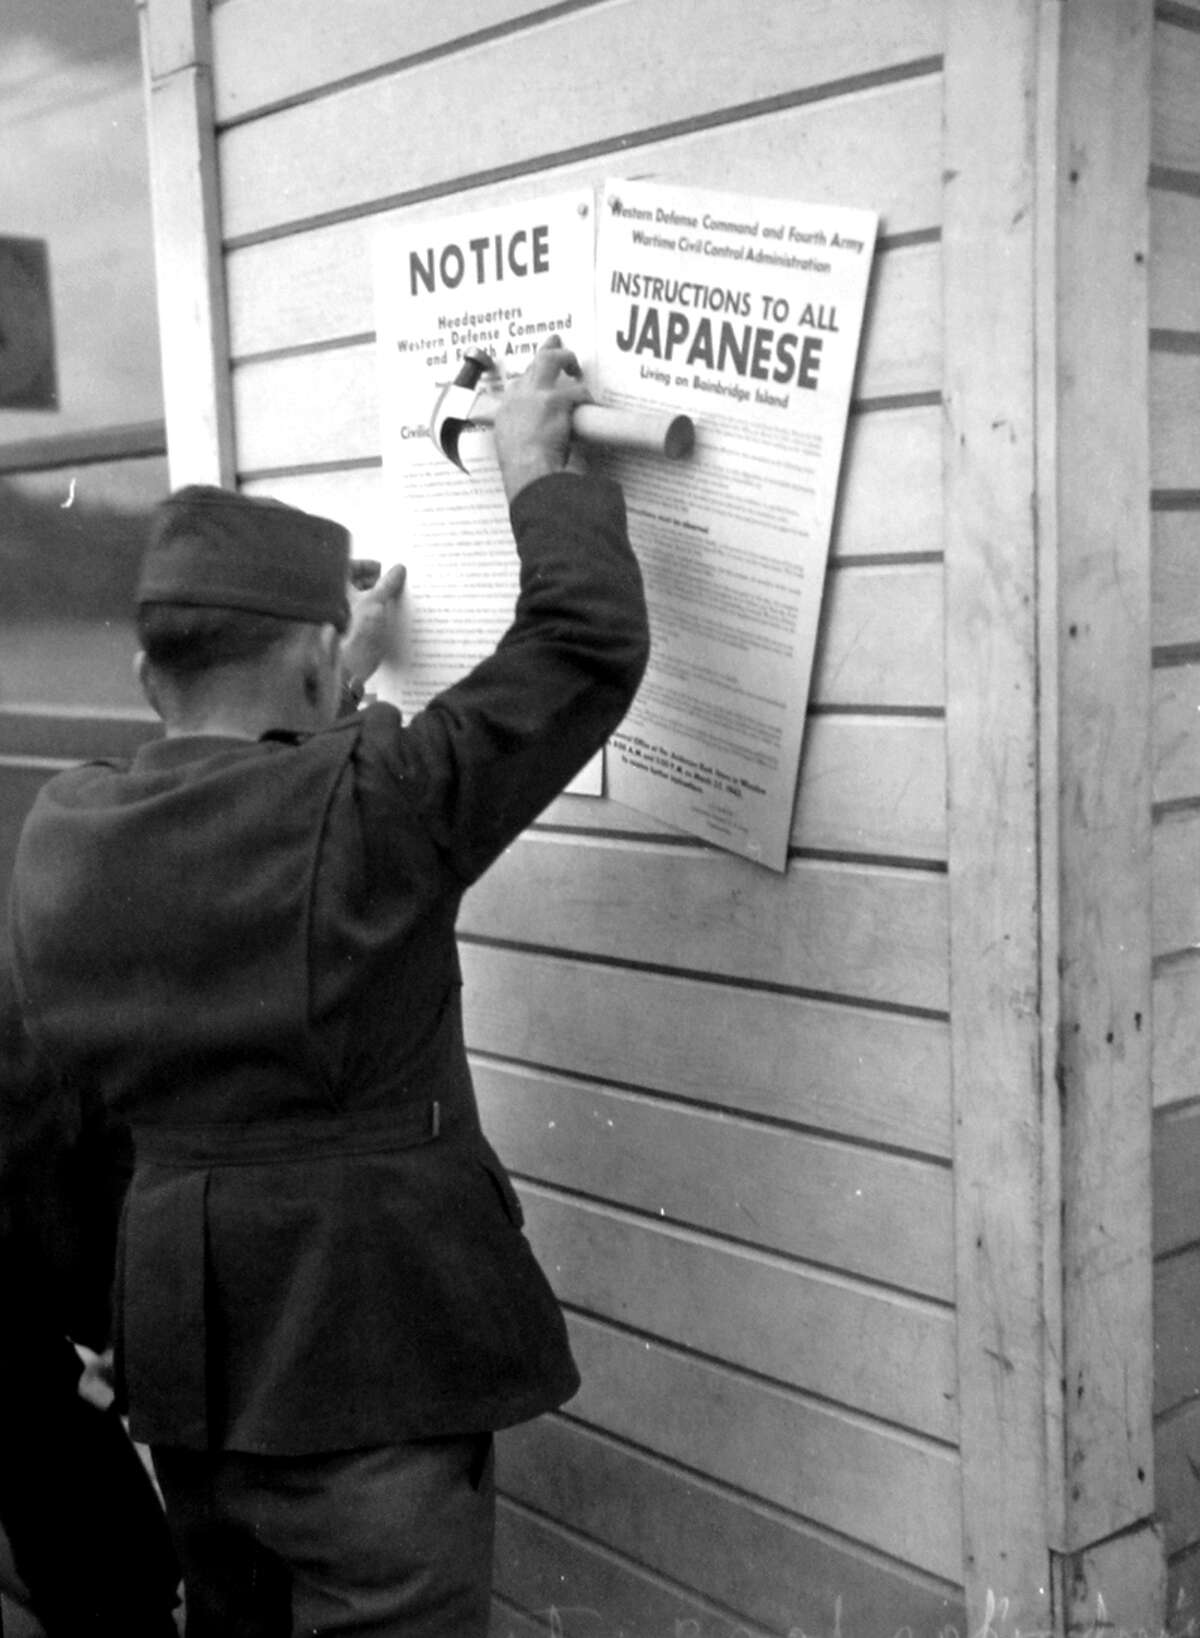 This picture was taken in 1942 after Japanese Americans were taken to internment camps, as ordered in February of that year by President Franklin Roosevelt. The following month a P-I photographer followed 225 people were left Bainbridge Island for internment camps. A few of these images have never been published, and since 1976 the P-I negatives have been carefully preserved at the Museum of History and Industry.